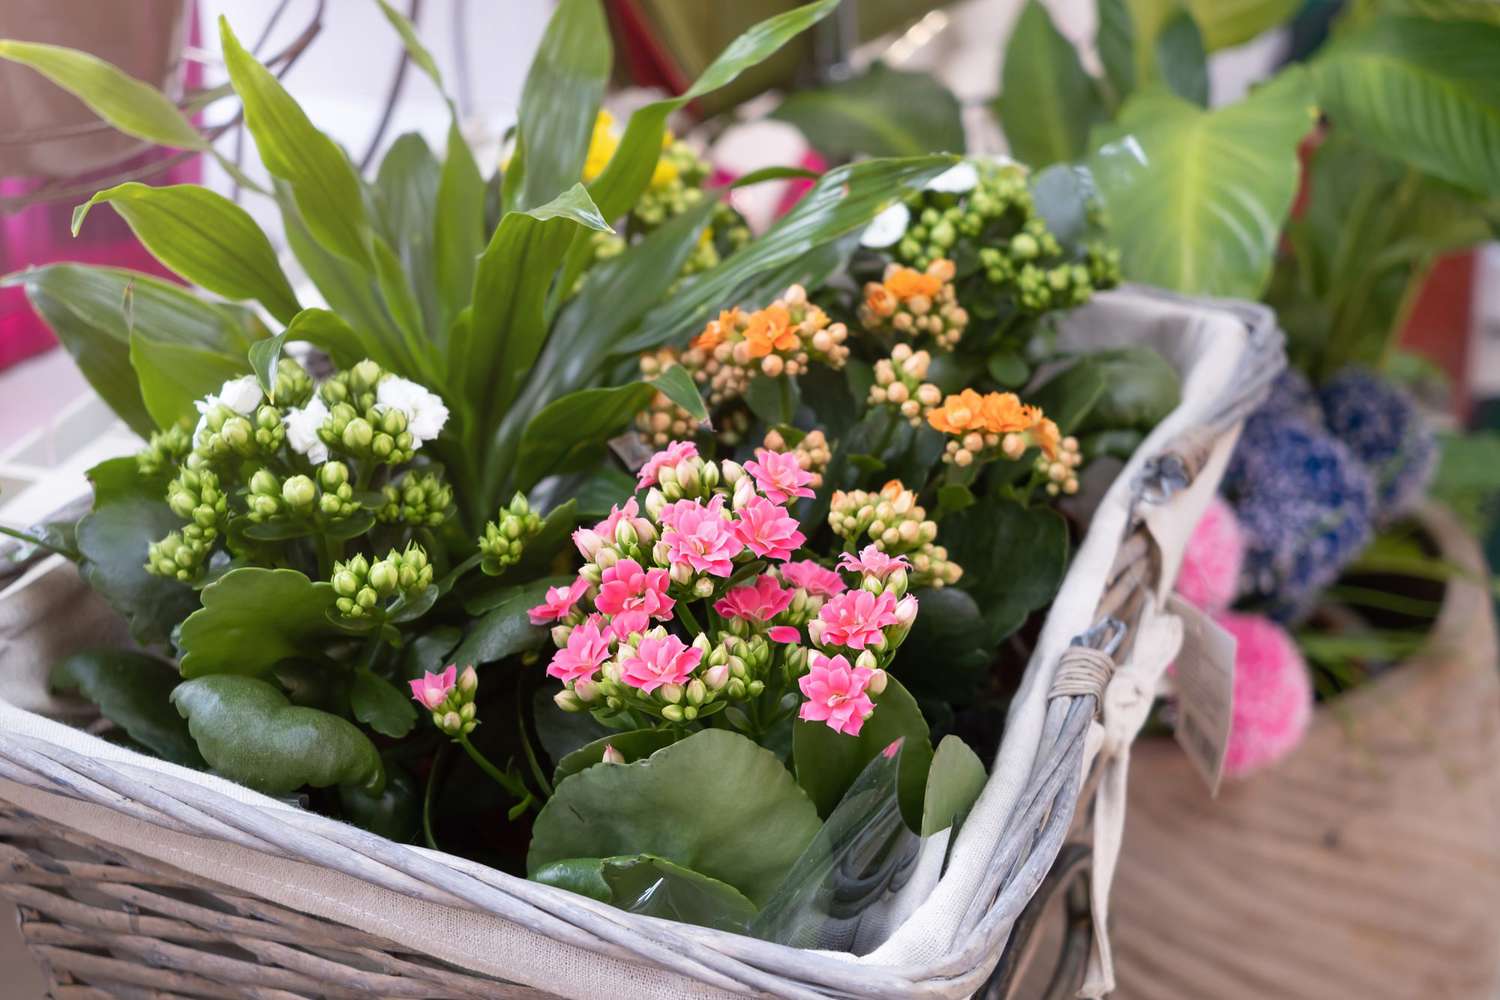 How to care for kalanchoe, plant with pink blossoms